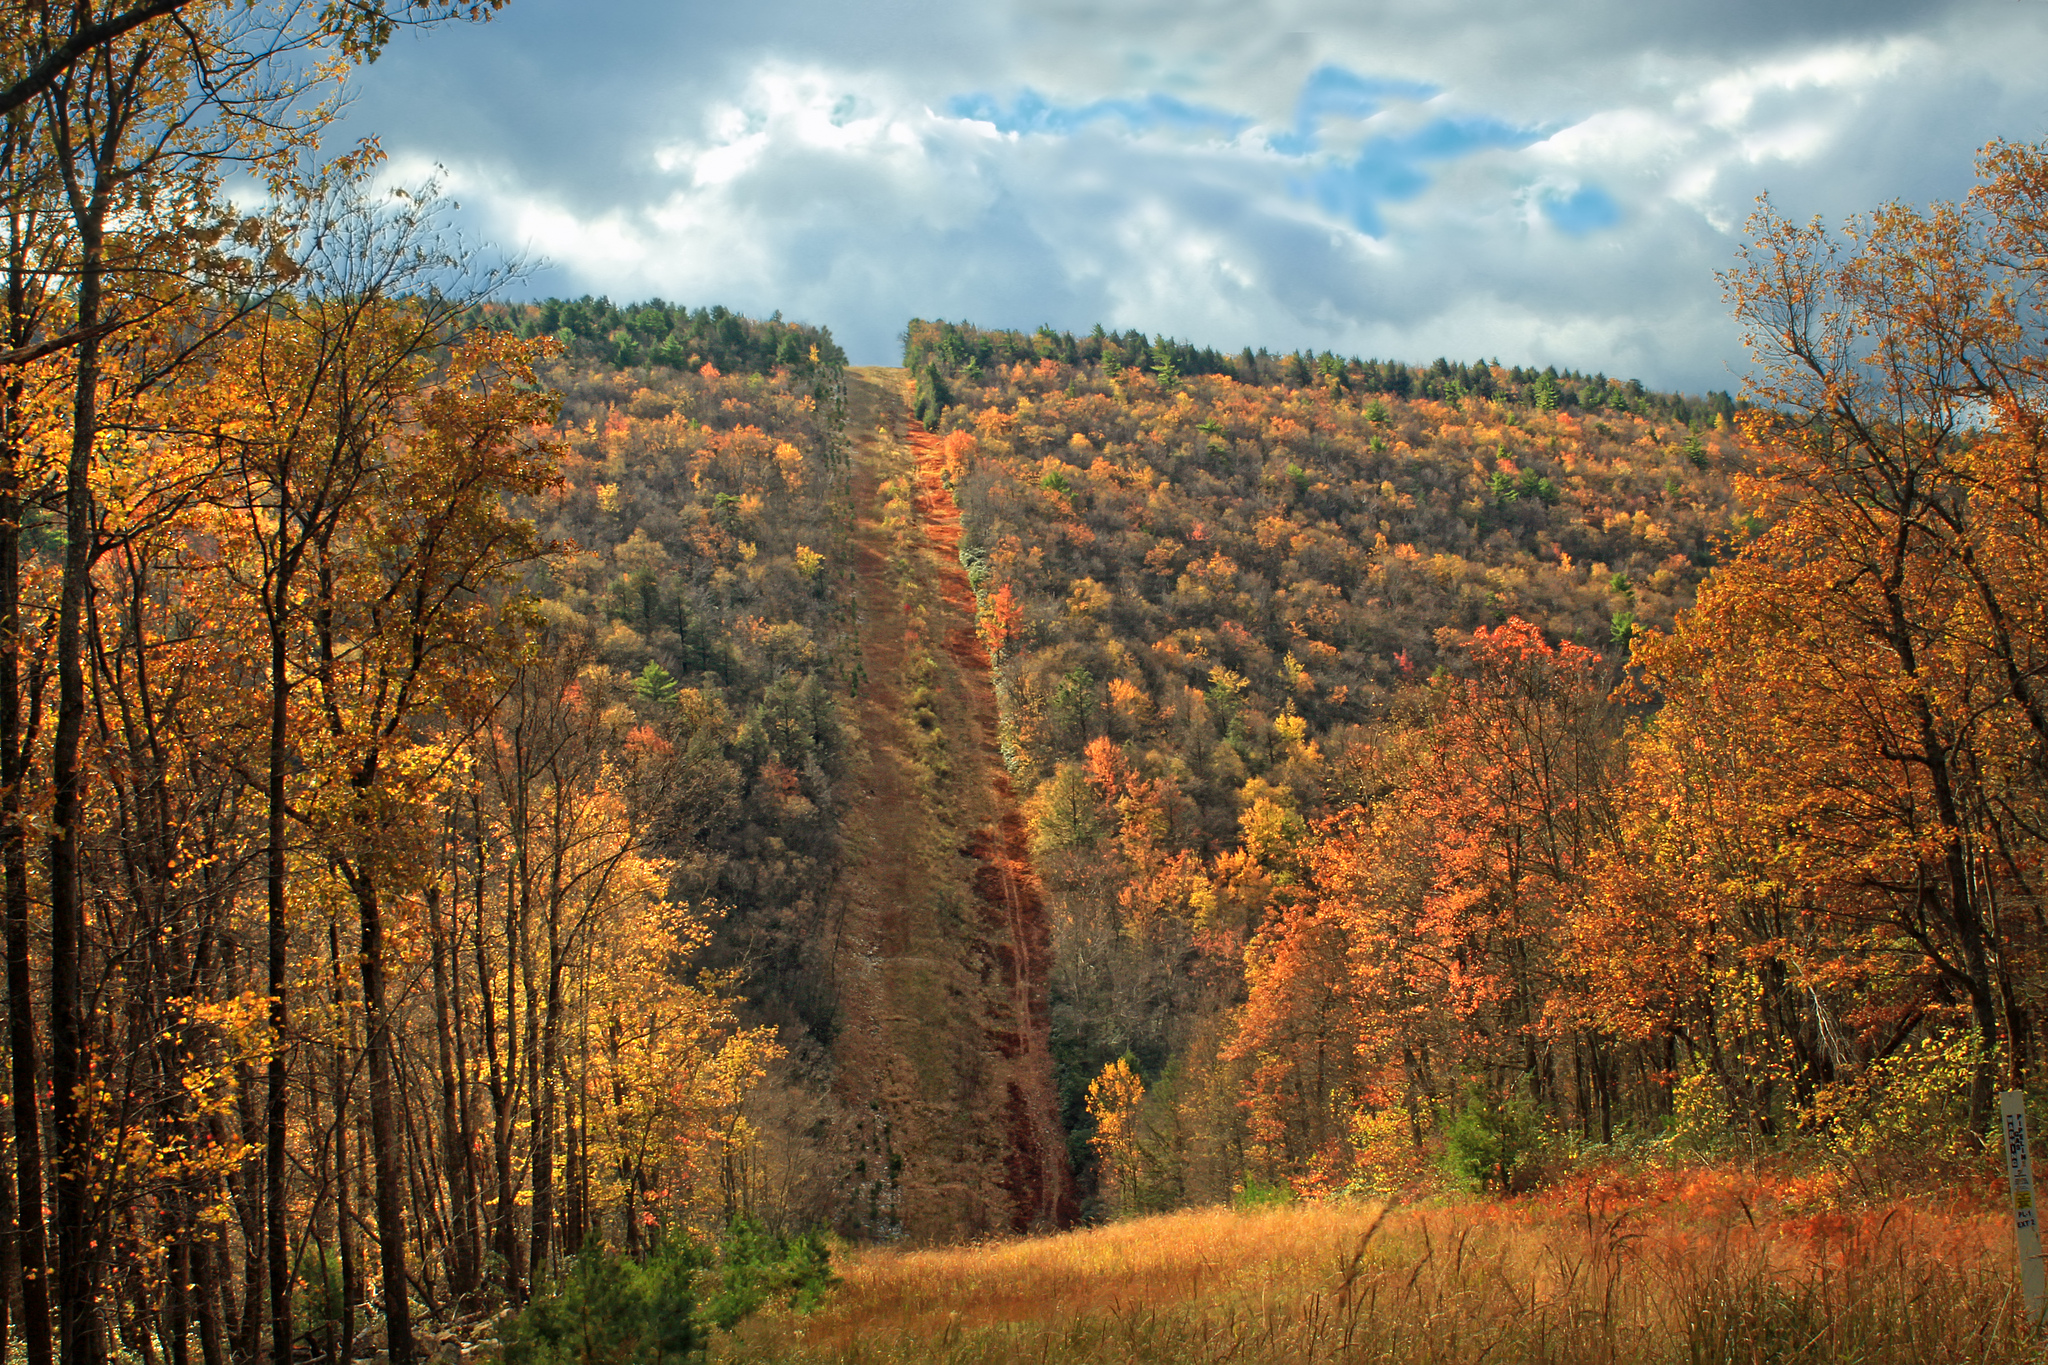 South view of a pipeline swath forming the eastern boundary of the Detweiler Run Natural Area, Centre County–Huntingdon County line, within Rothrock State Forest. Photo: Nicholas A. Tonelli via Flickr